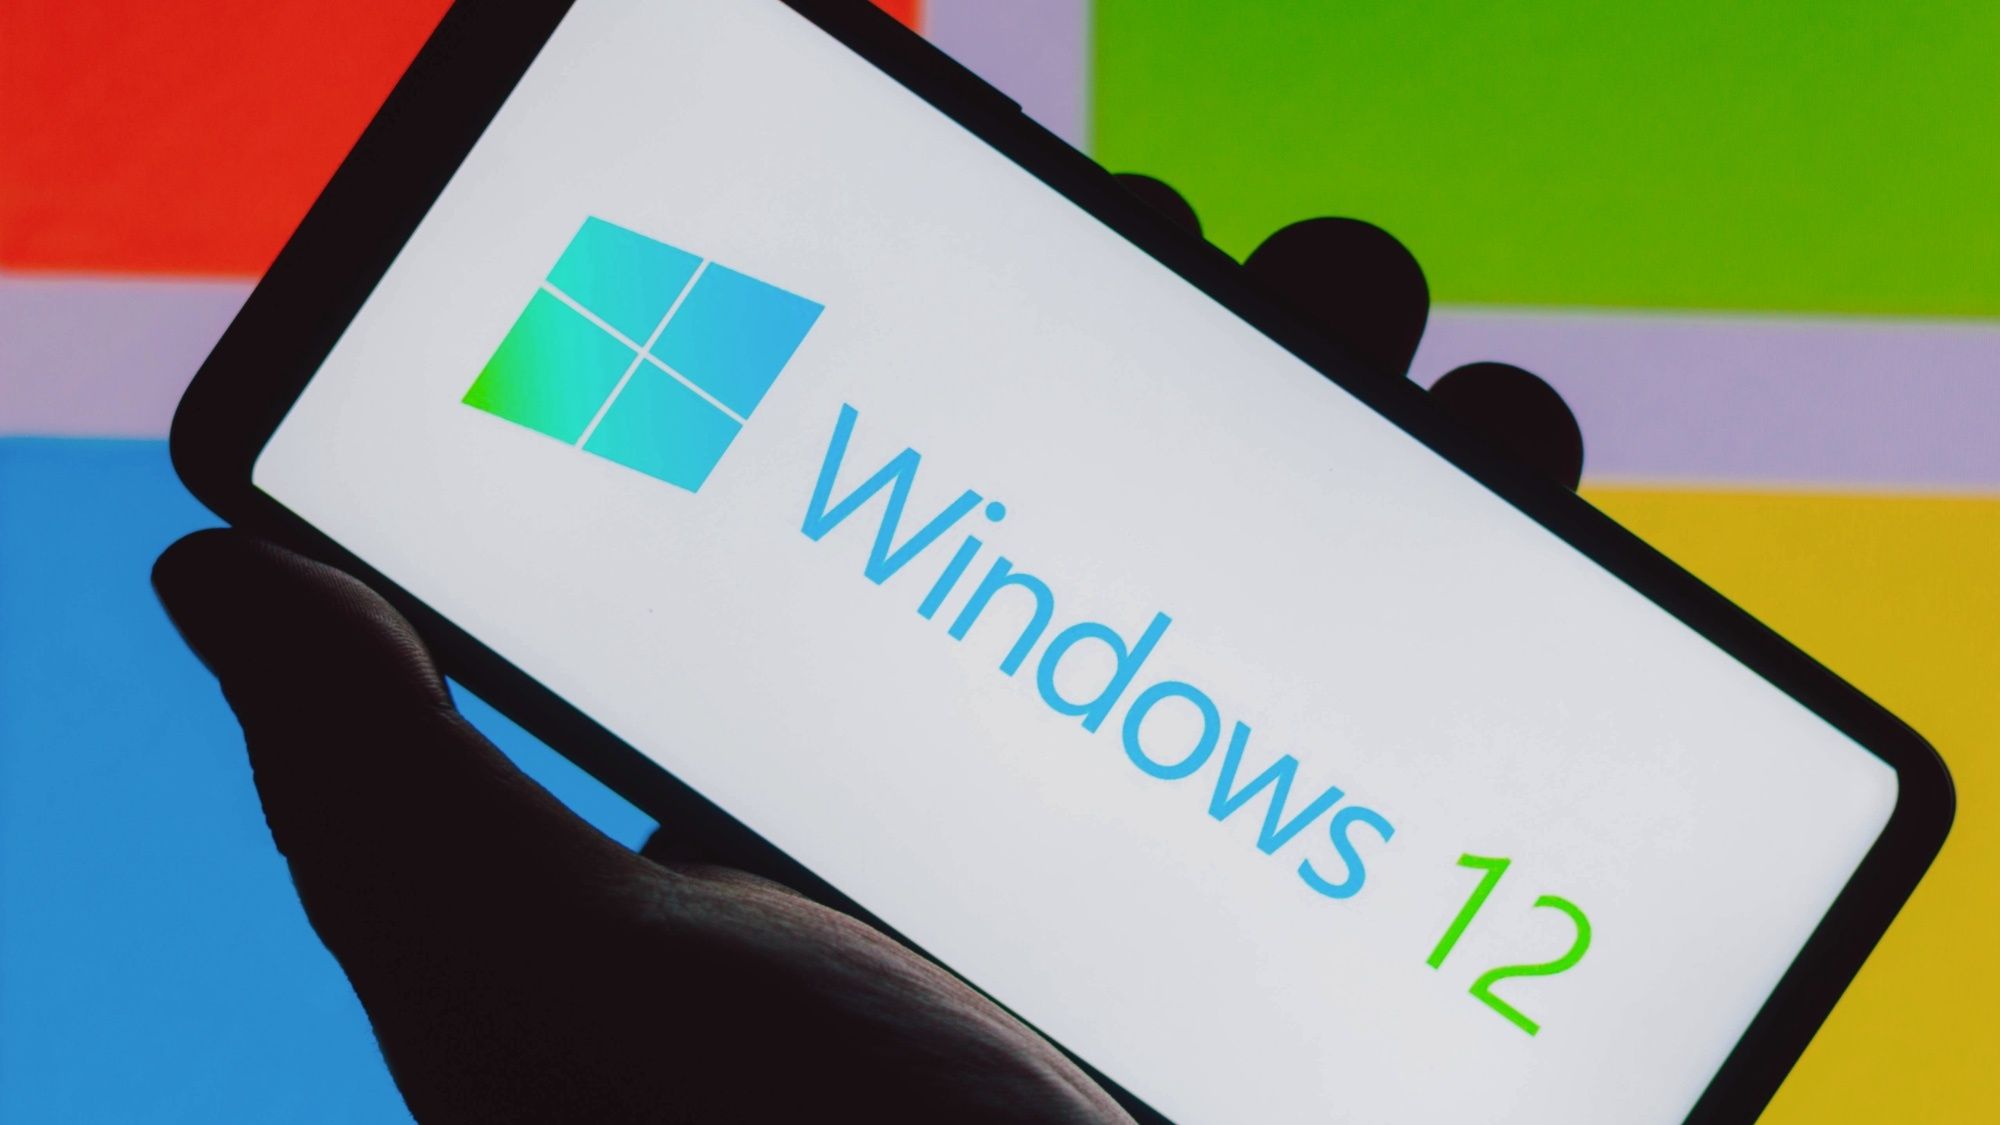 Windows 12 early rumors and what we want to see